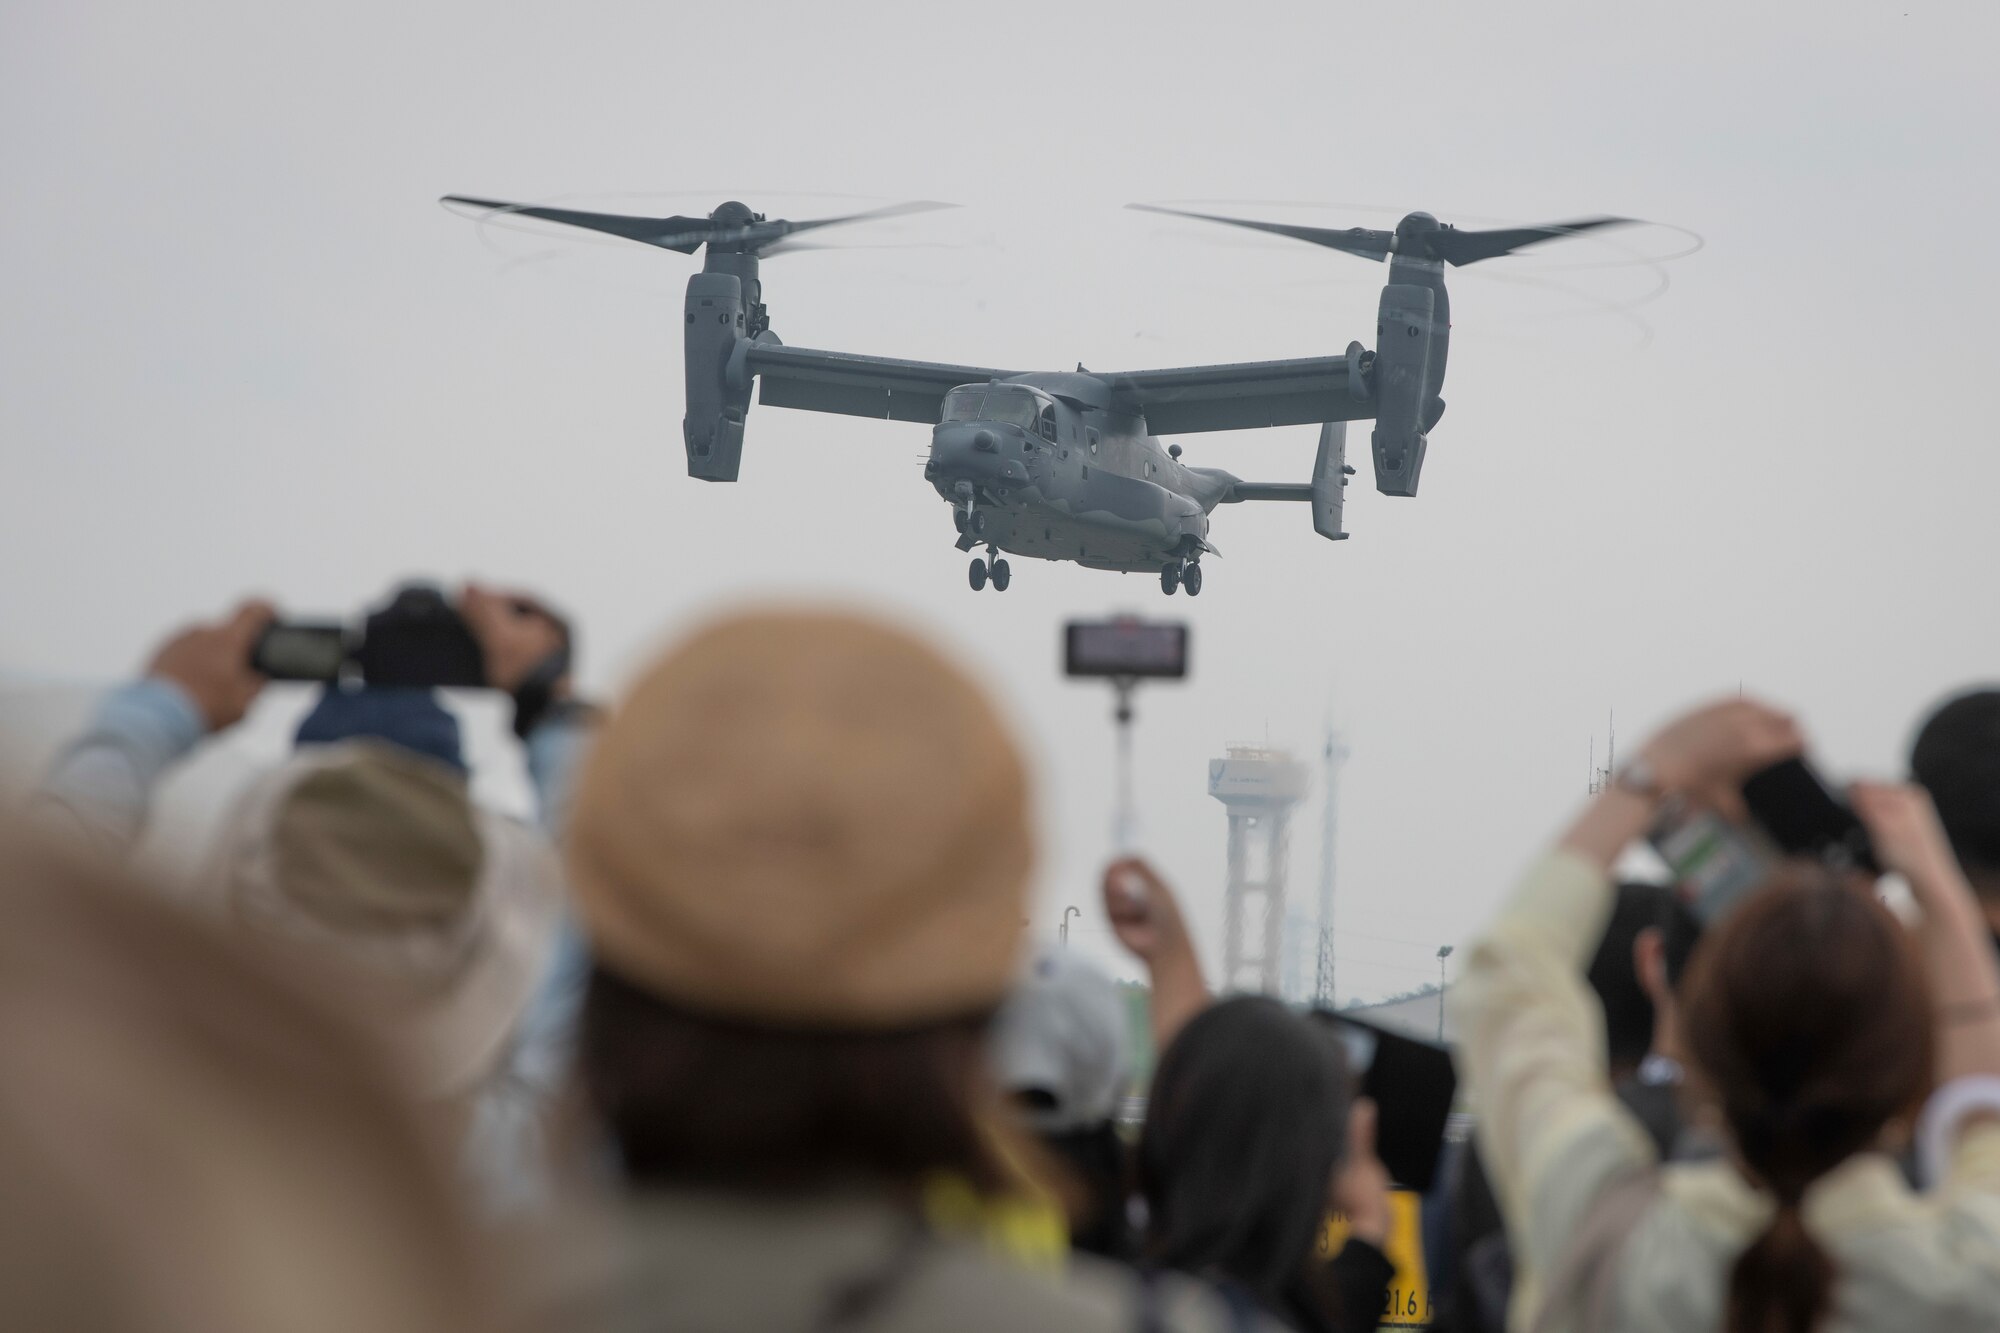 Attendees watch the demonstration of CV-22 Osprey capabilities exercise during Friendship Festival 2022, at Yokota Air Base, Japan, May 21. The demonstration was one of many events during the weekend that showcased U.S. military capabilities. (U.S. Air Force photo by Machiko Arita)